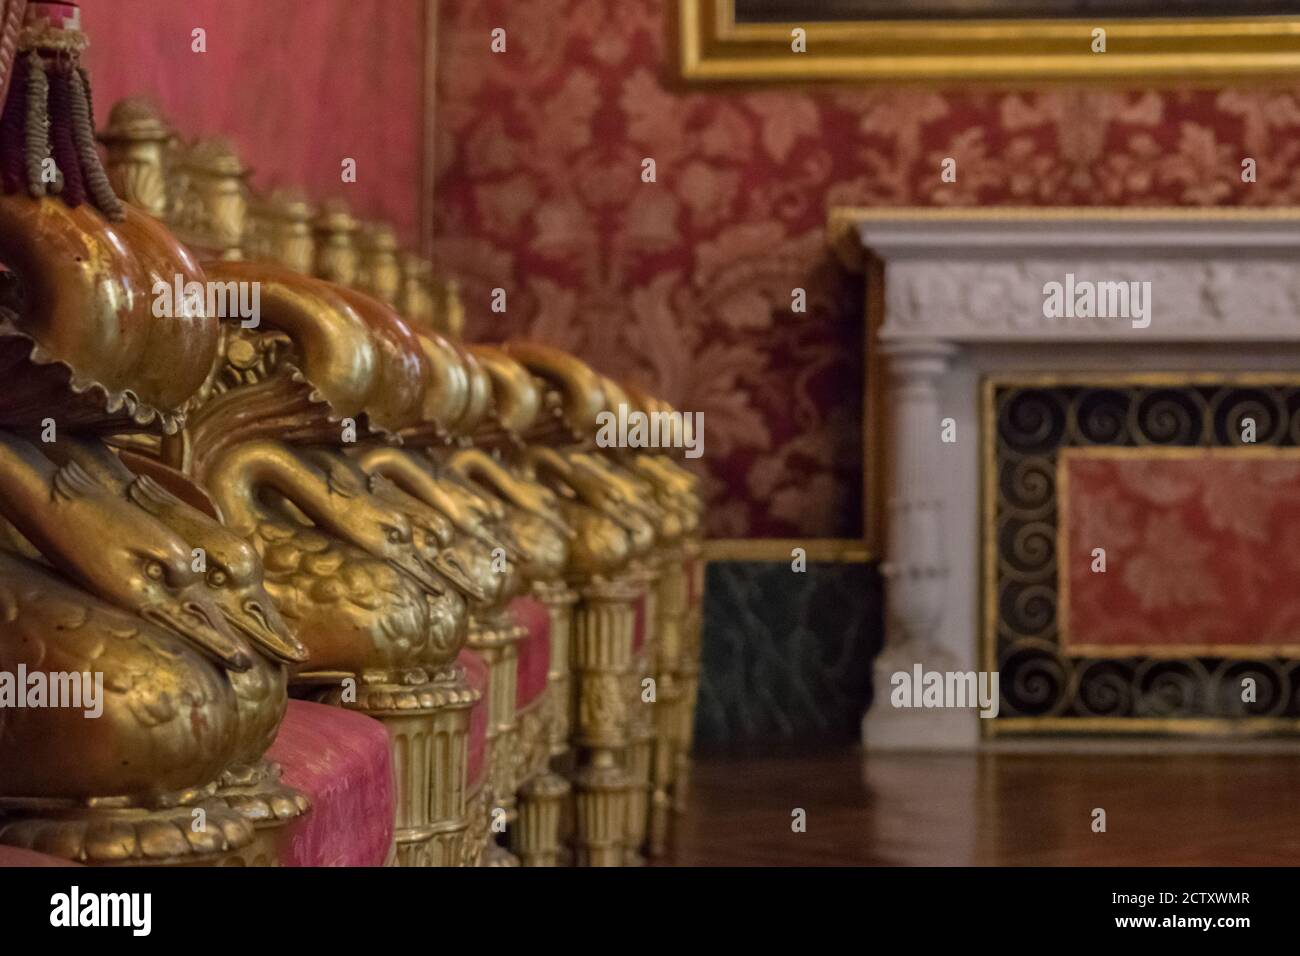 throne in a royal palace Stock Photo